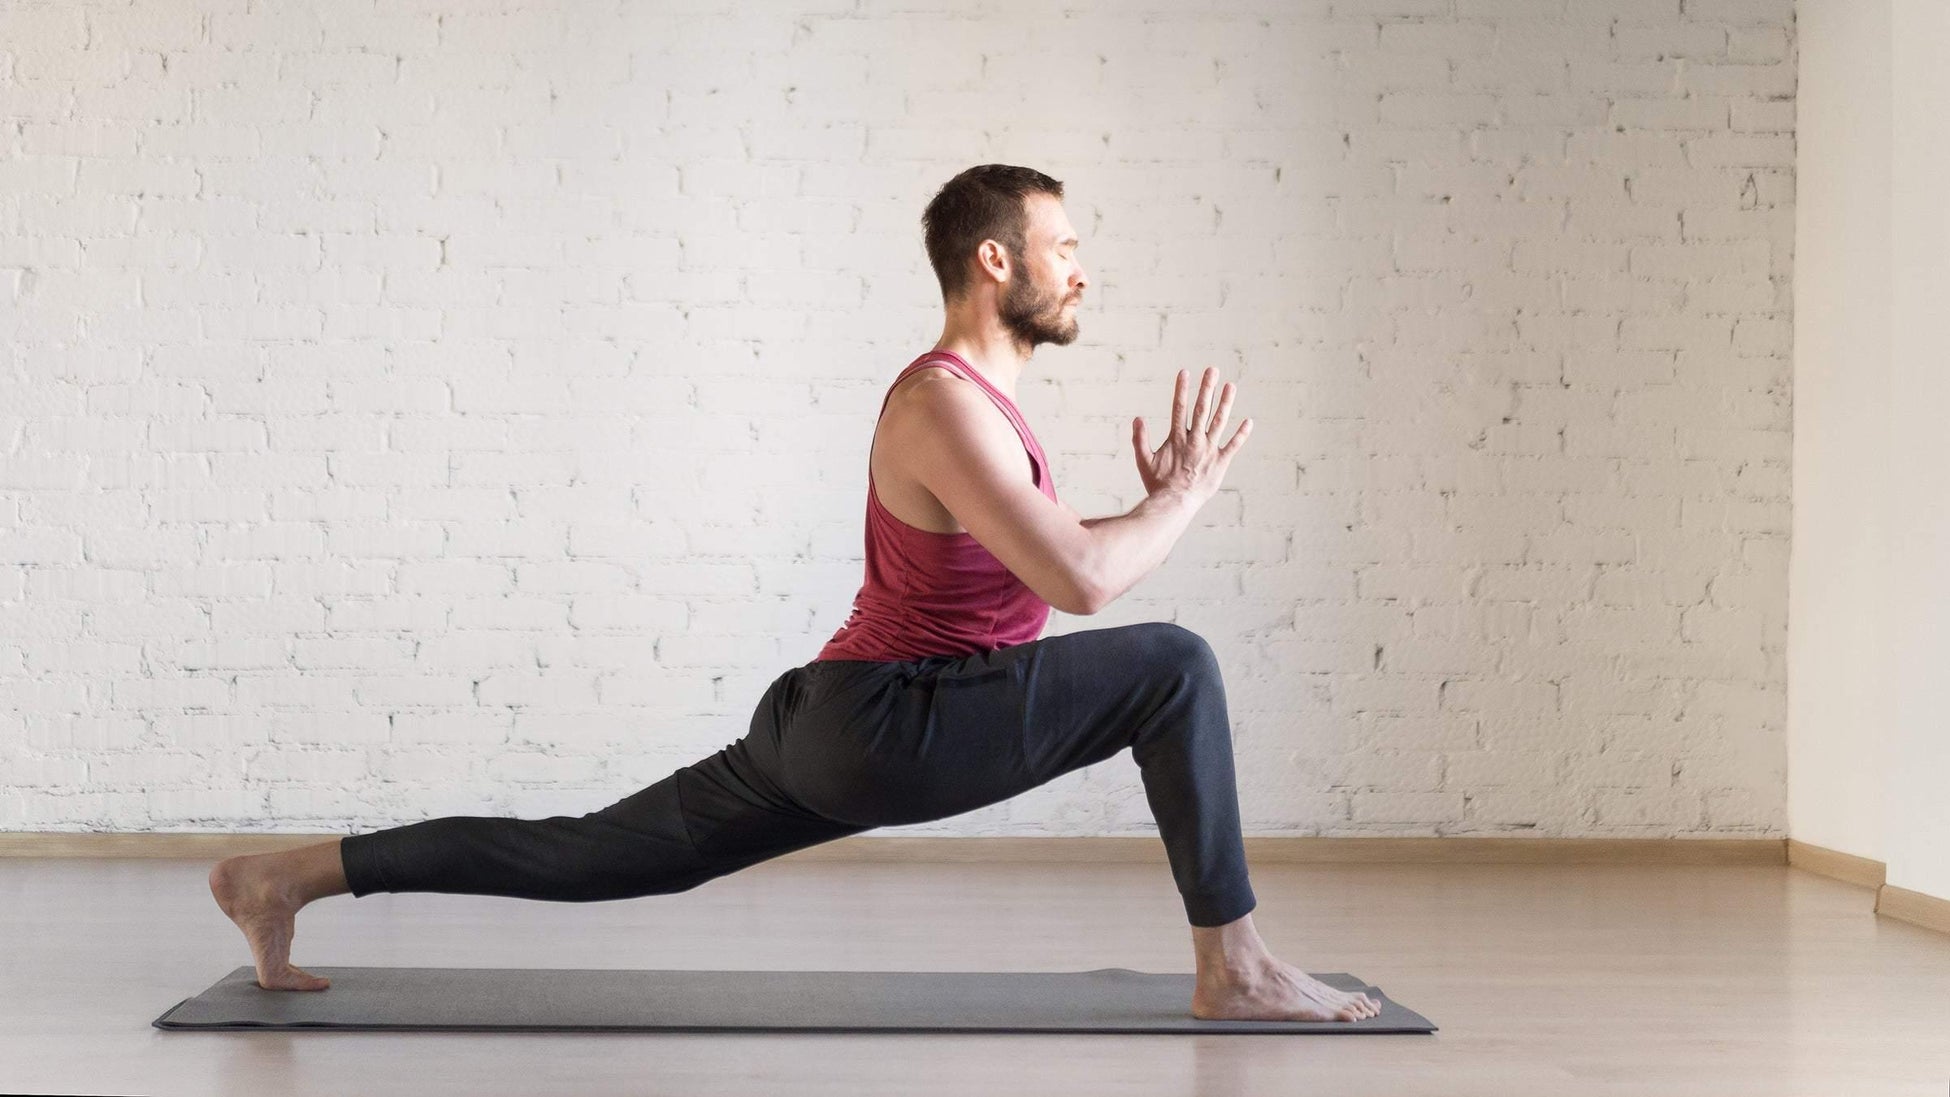 Is yoga beneficial for men’s health?